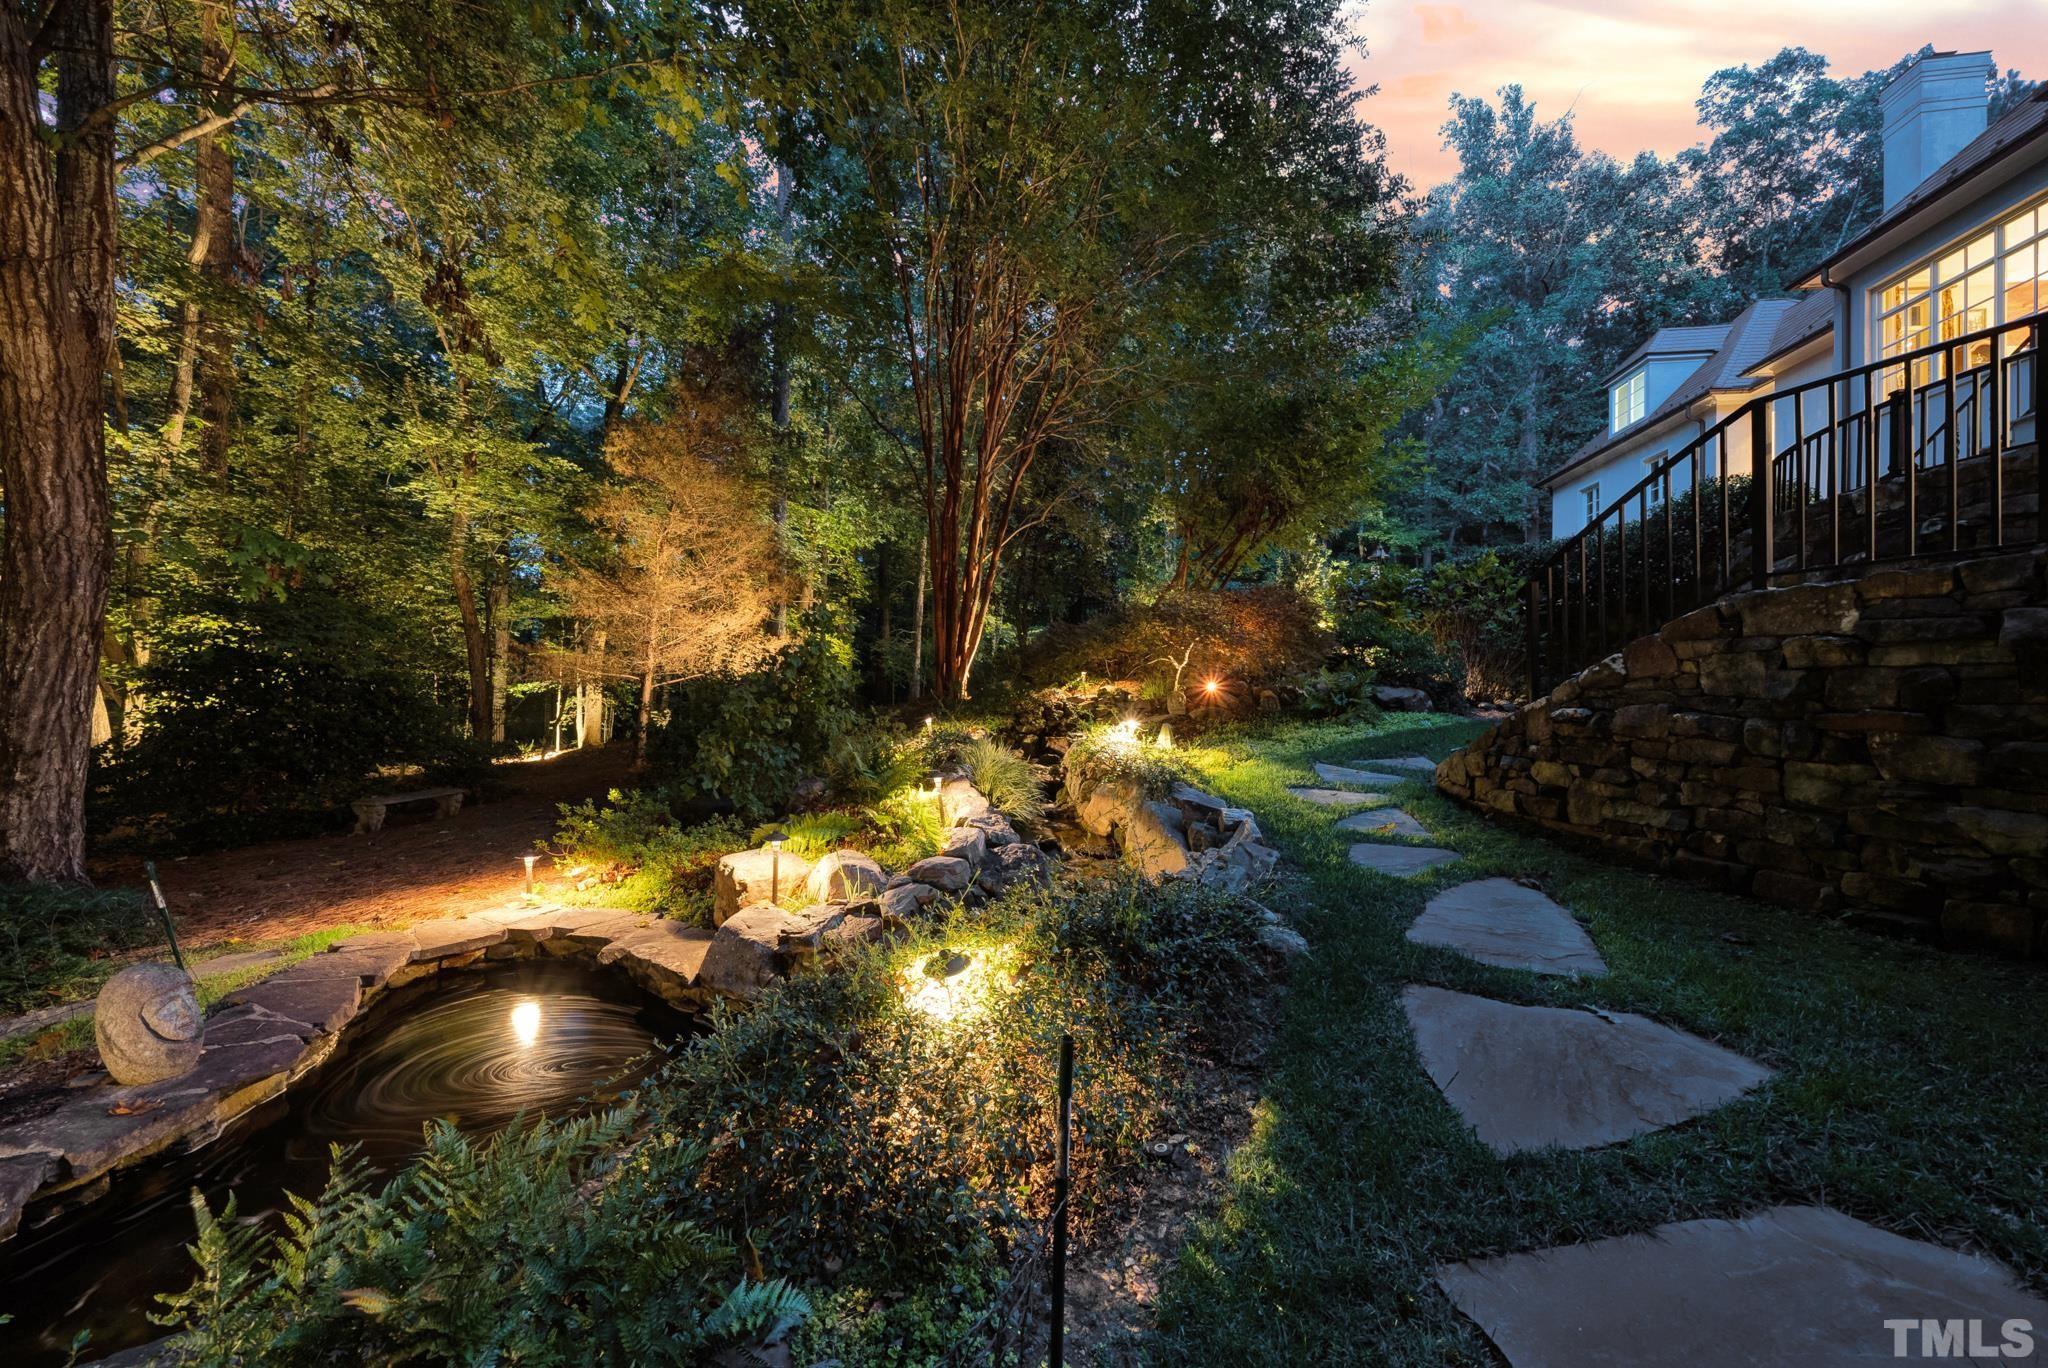 Gorgeous views of backyard at night with front and rear night scaping.  Relax on the screened in back porch listening to the rock waterfall.